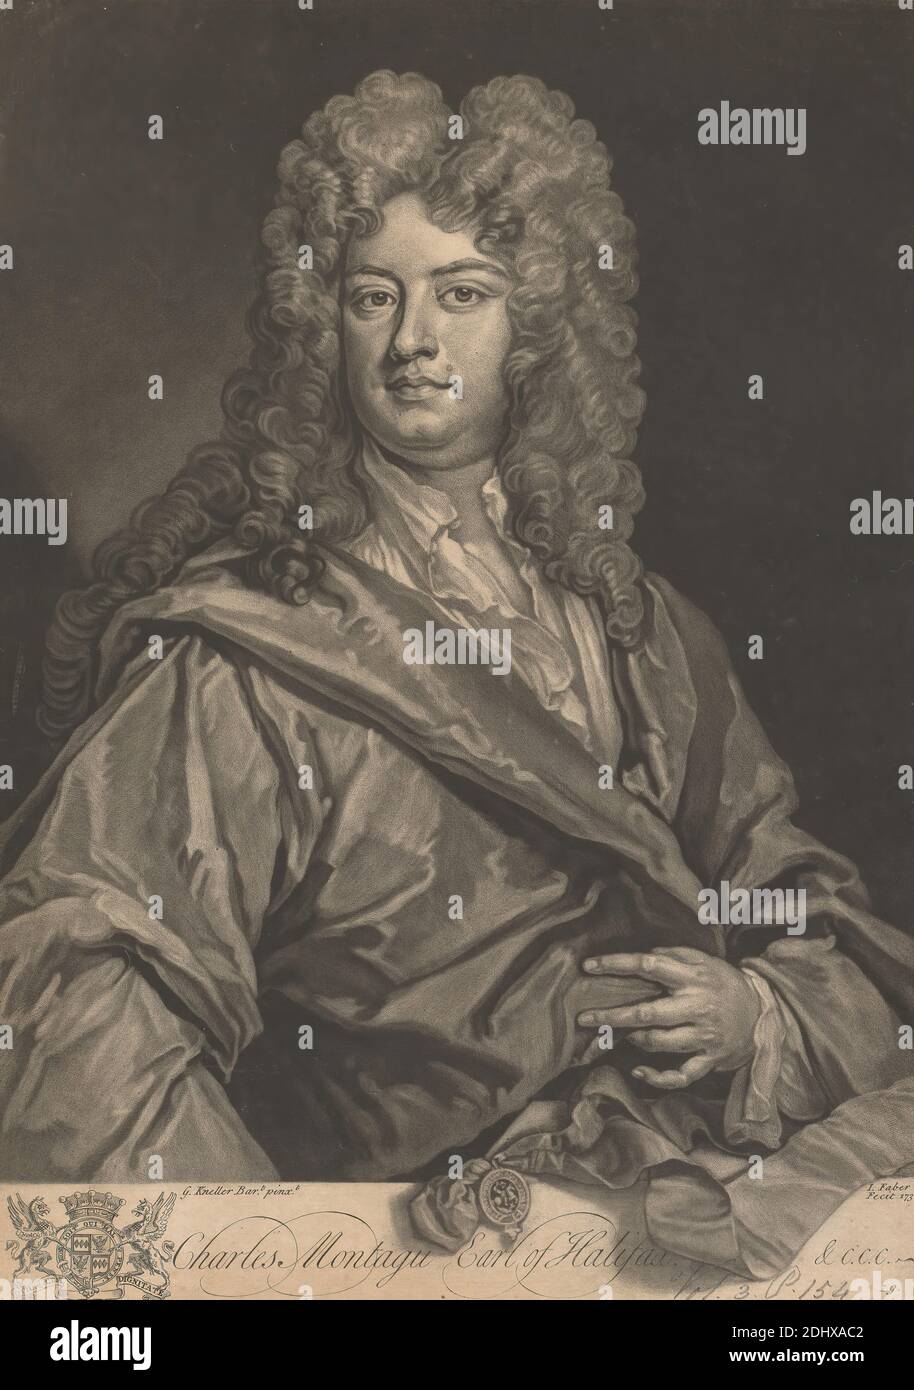 Charles Montagu, 1st Earl of Halifax, John Faber the Younger, ca. 1695–1756, Netherlandish, active in Britain, after Sir Godfrey Kneller, 1646–1723, German, active in Britain (from 1676), 1732, Mezzotint on medium, slightly textured, beige, laid paper, Sheet: 13 7/8 × 13 9/16 inches (35.2 × 34.4 cm) and Image: 9 15/16 × 9 13/16 inches (25.2 × 24.9 cm Stock Photo